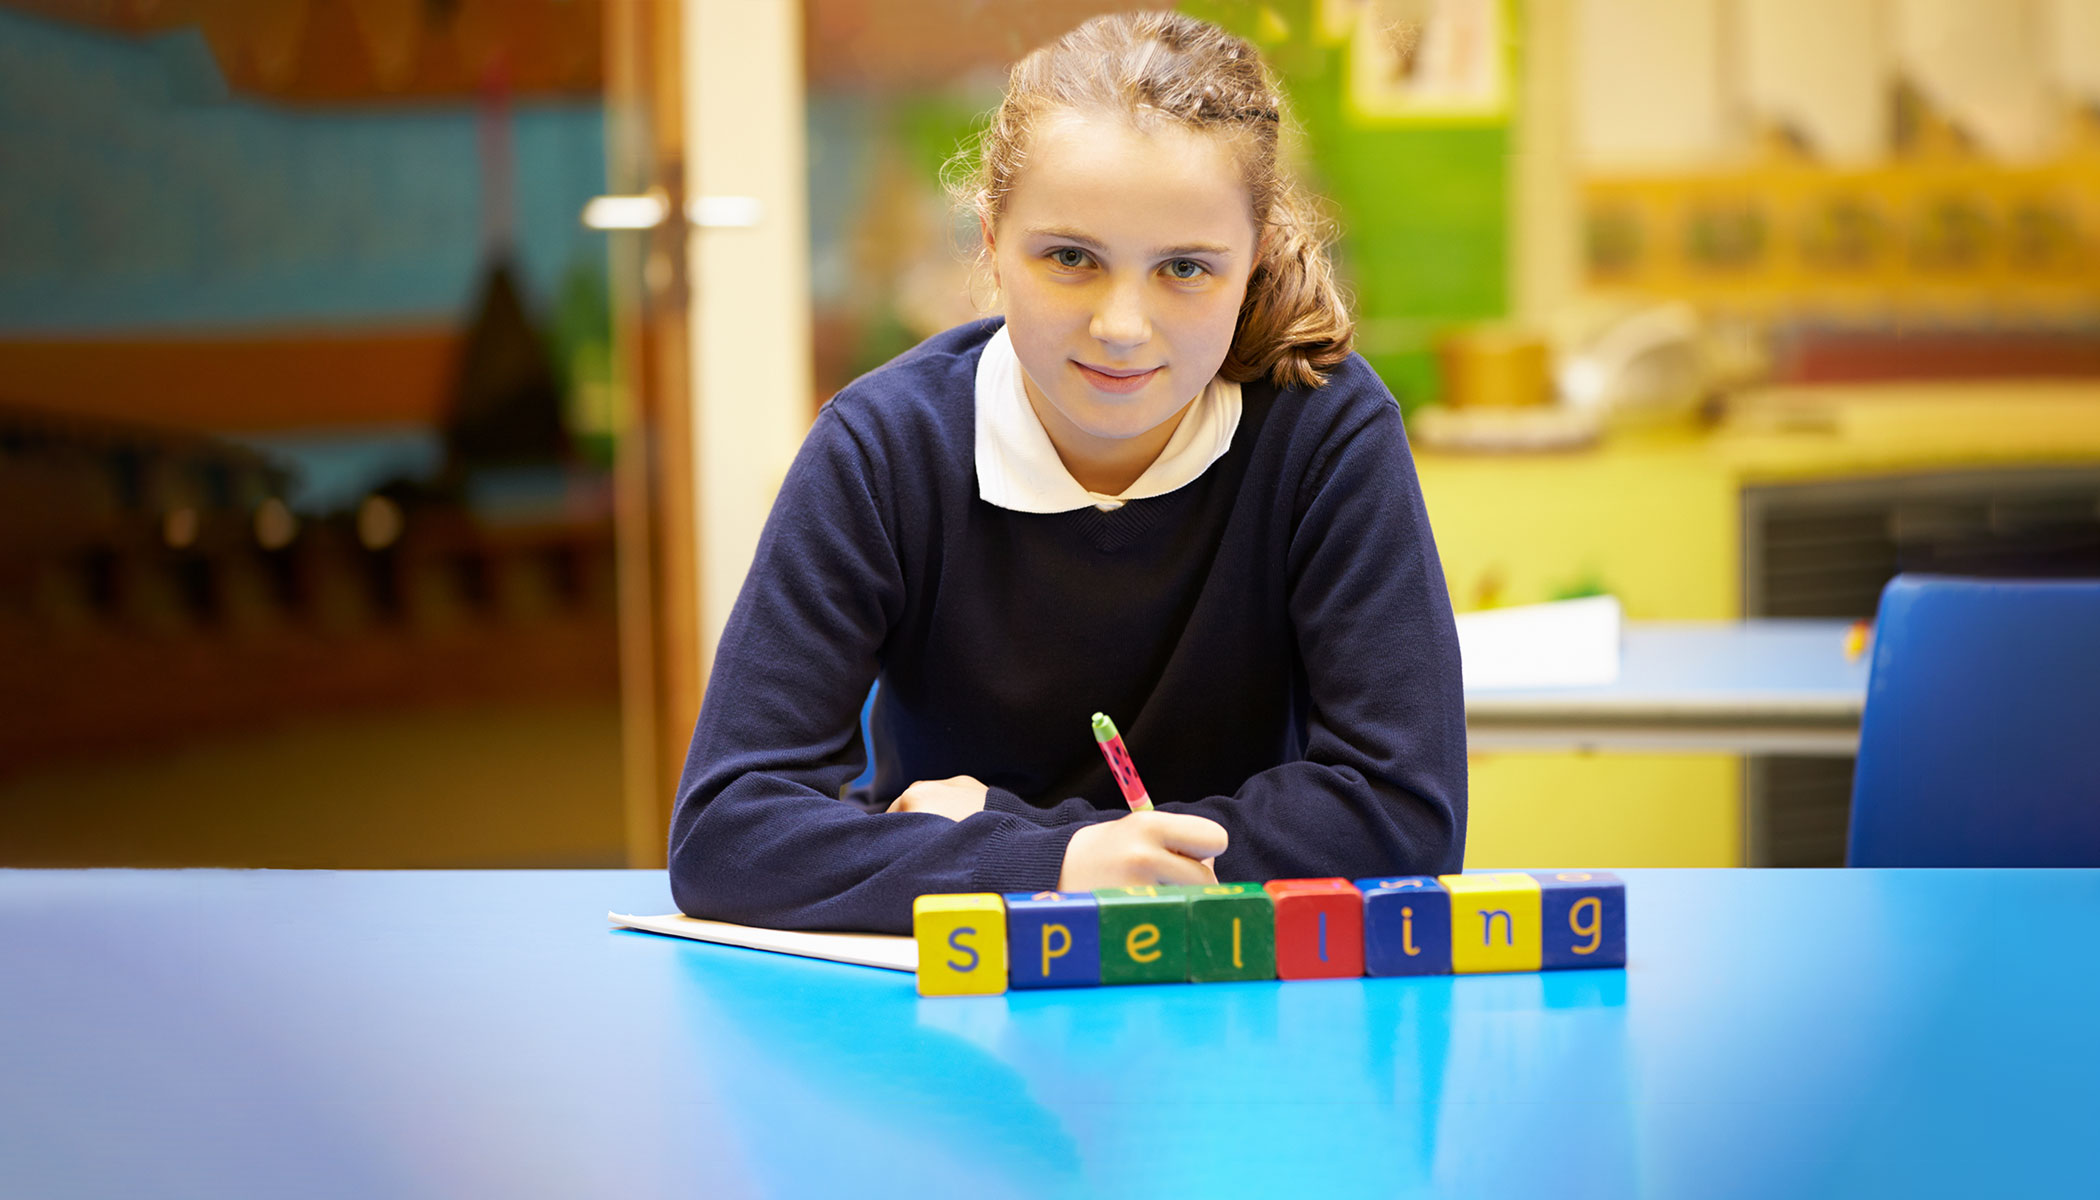 A student sits at a table in a school classroom. On the table are blocks spelling out “spelling.’